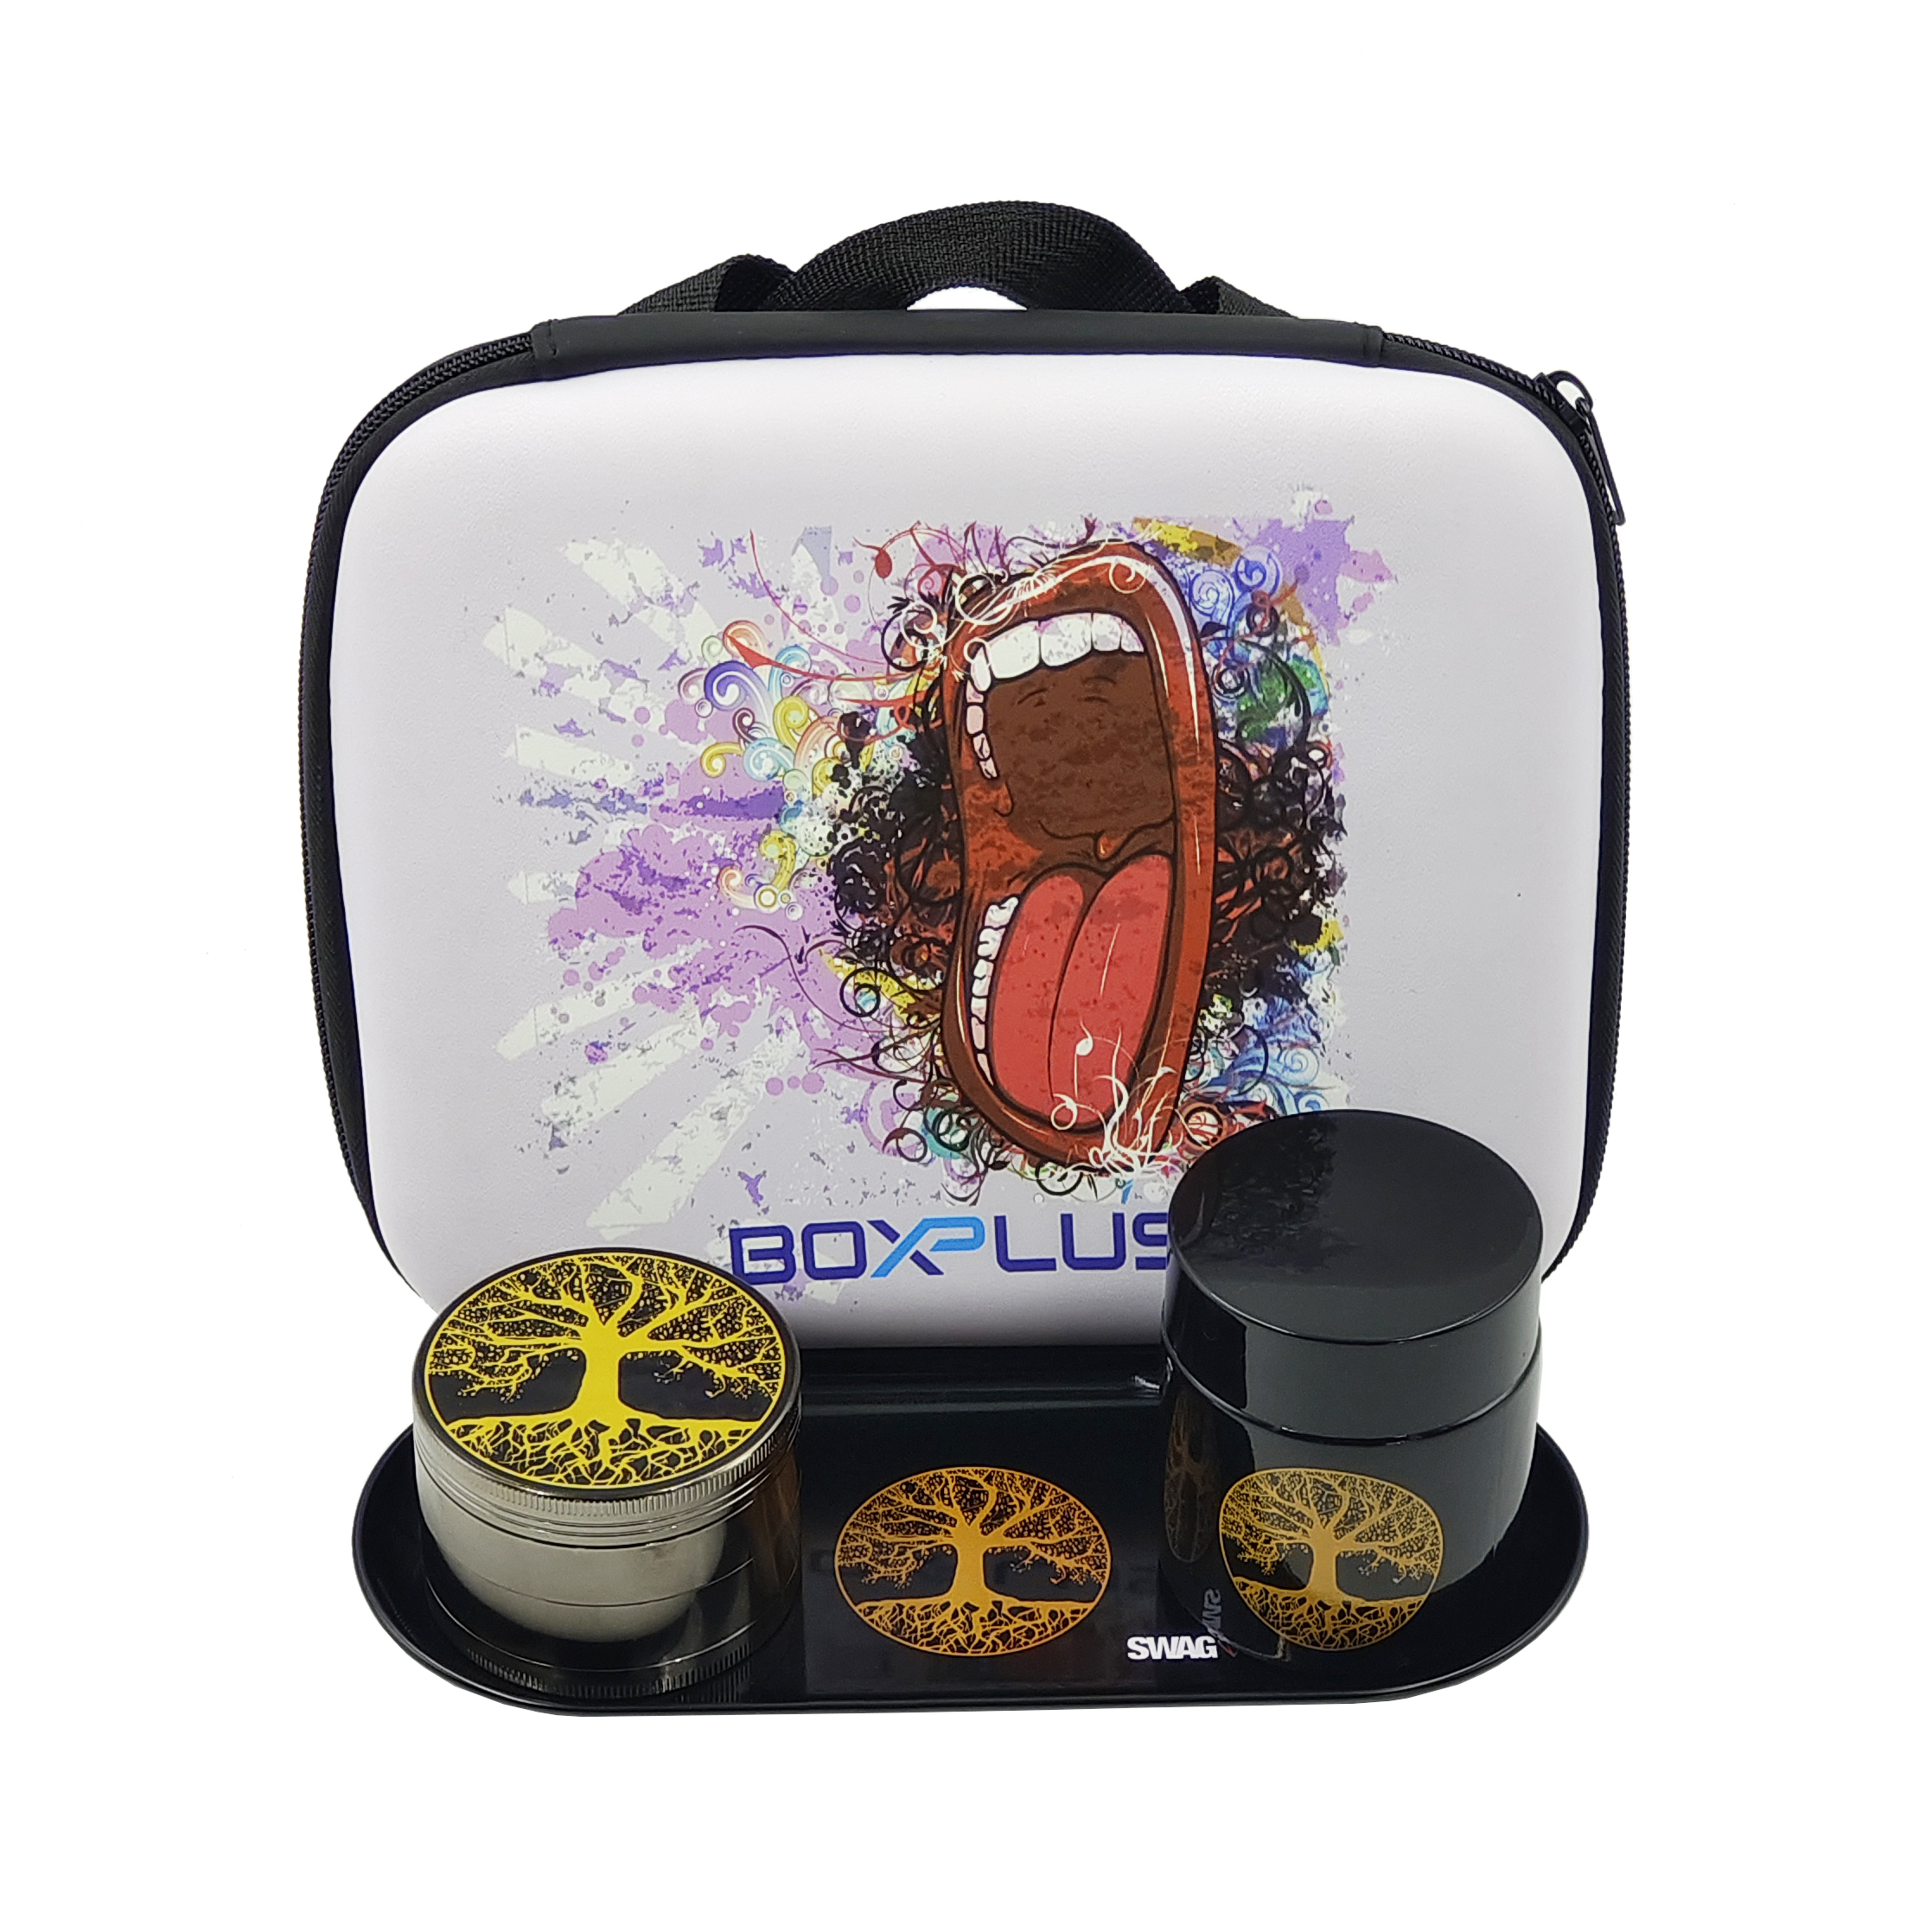 [BP-E104][184*142*57 mm]Customizable Logo Smoker Kit Tobacco Box with Stash Jar Cigarette Tray 420 Accessories for Rolled Tobacco Storage and Grinding